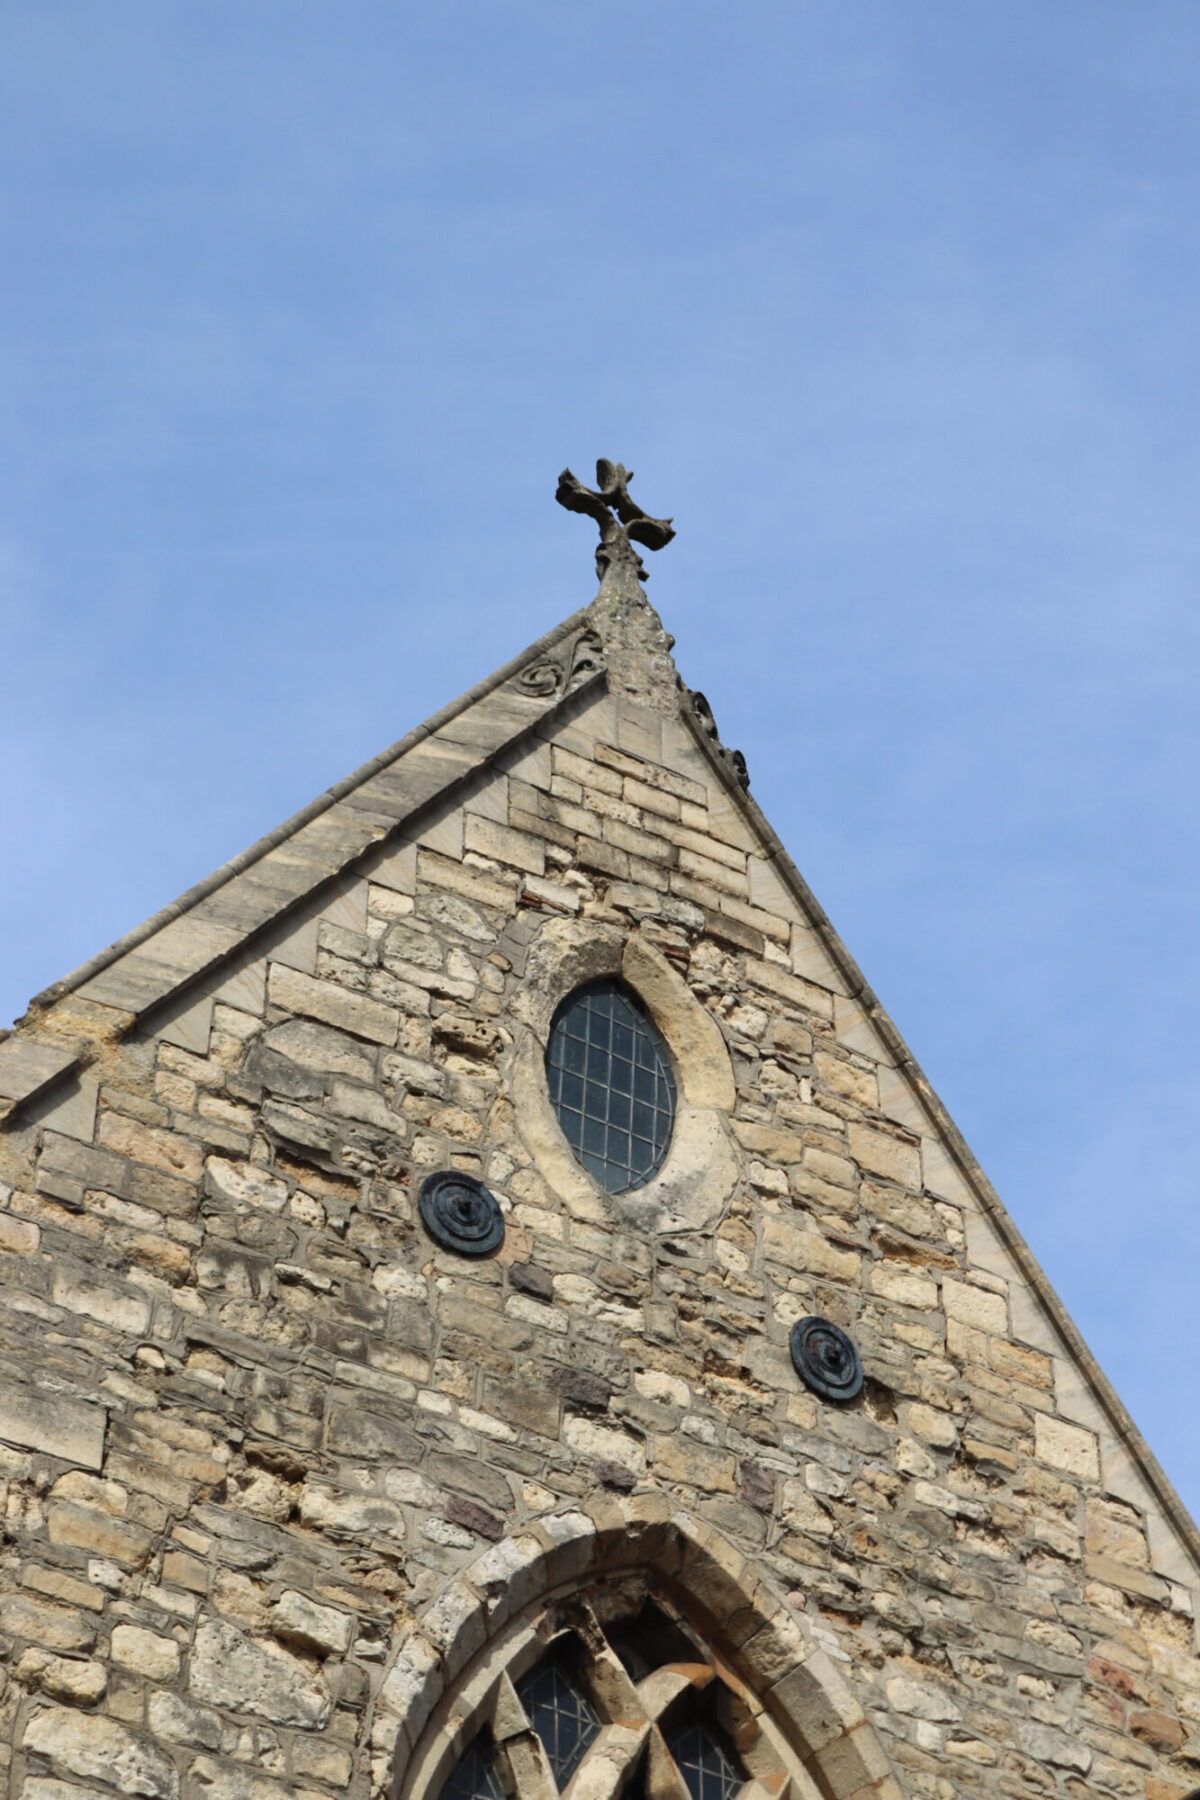 Gable end of the Greyfriars building with an oval shaped window and stone cross on the point of the roof.